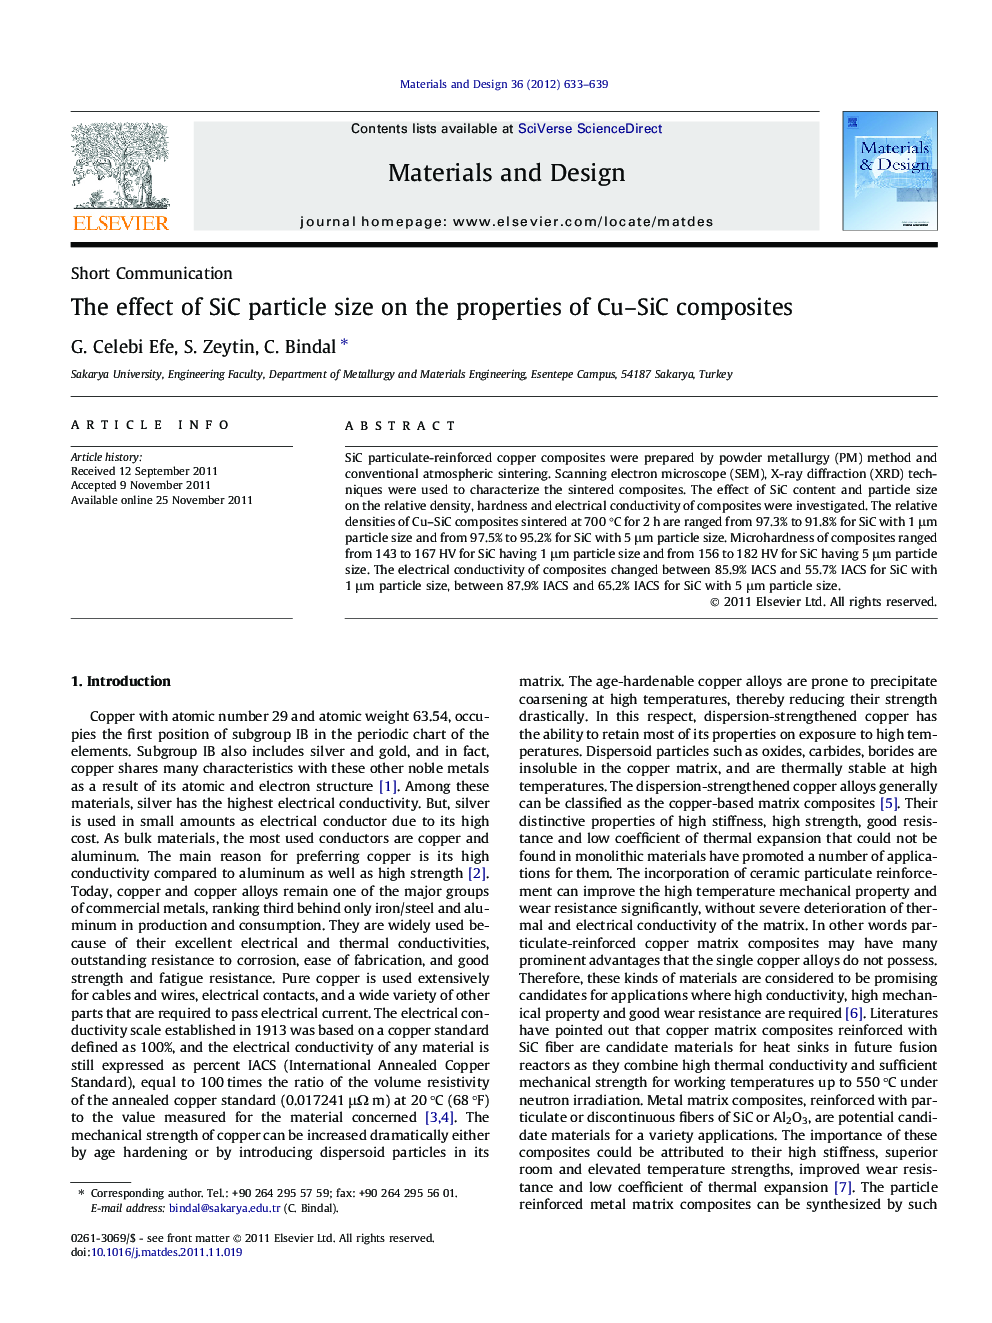 The effect of SiC particle size on the properties of Cu–SiC composites